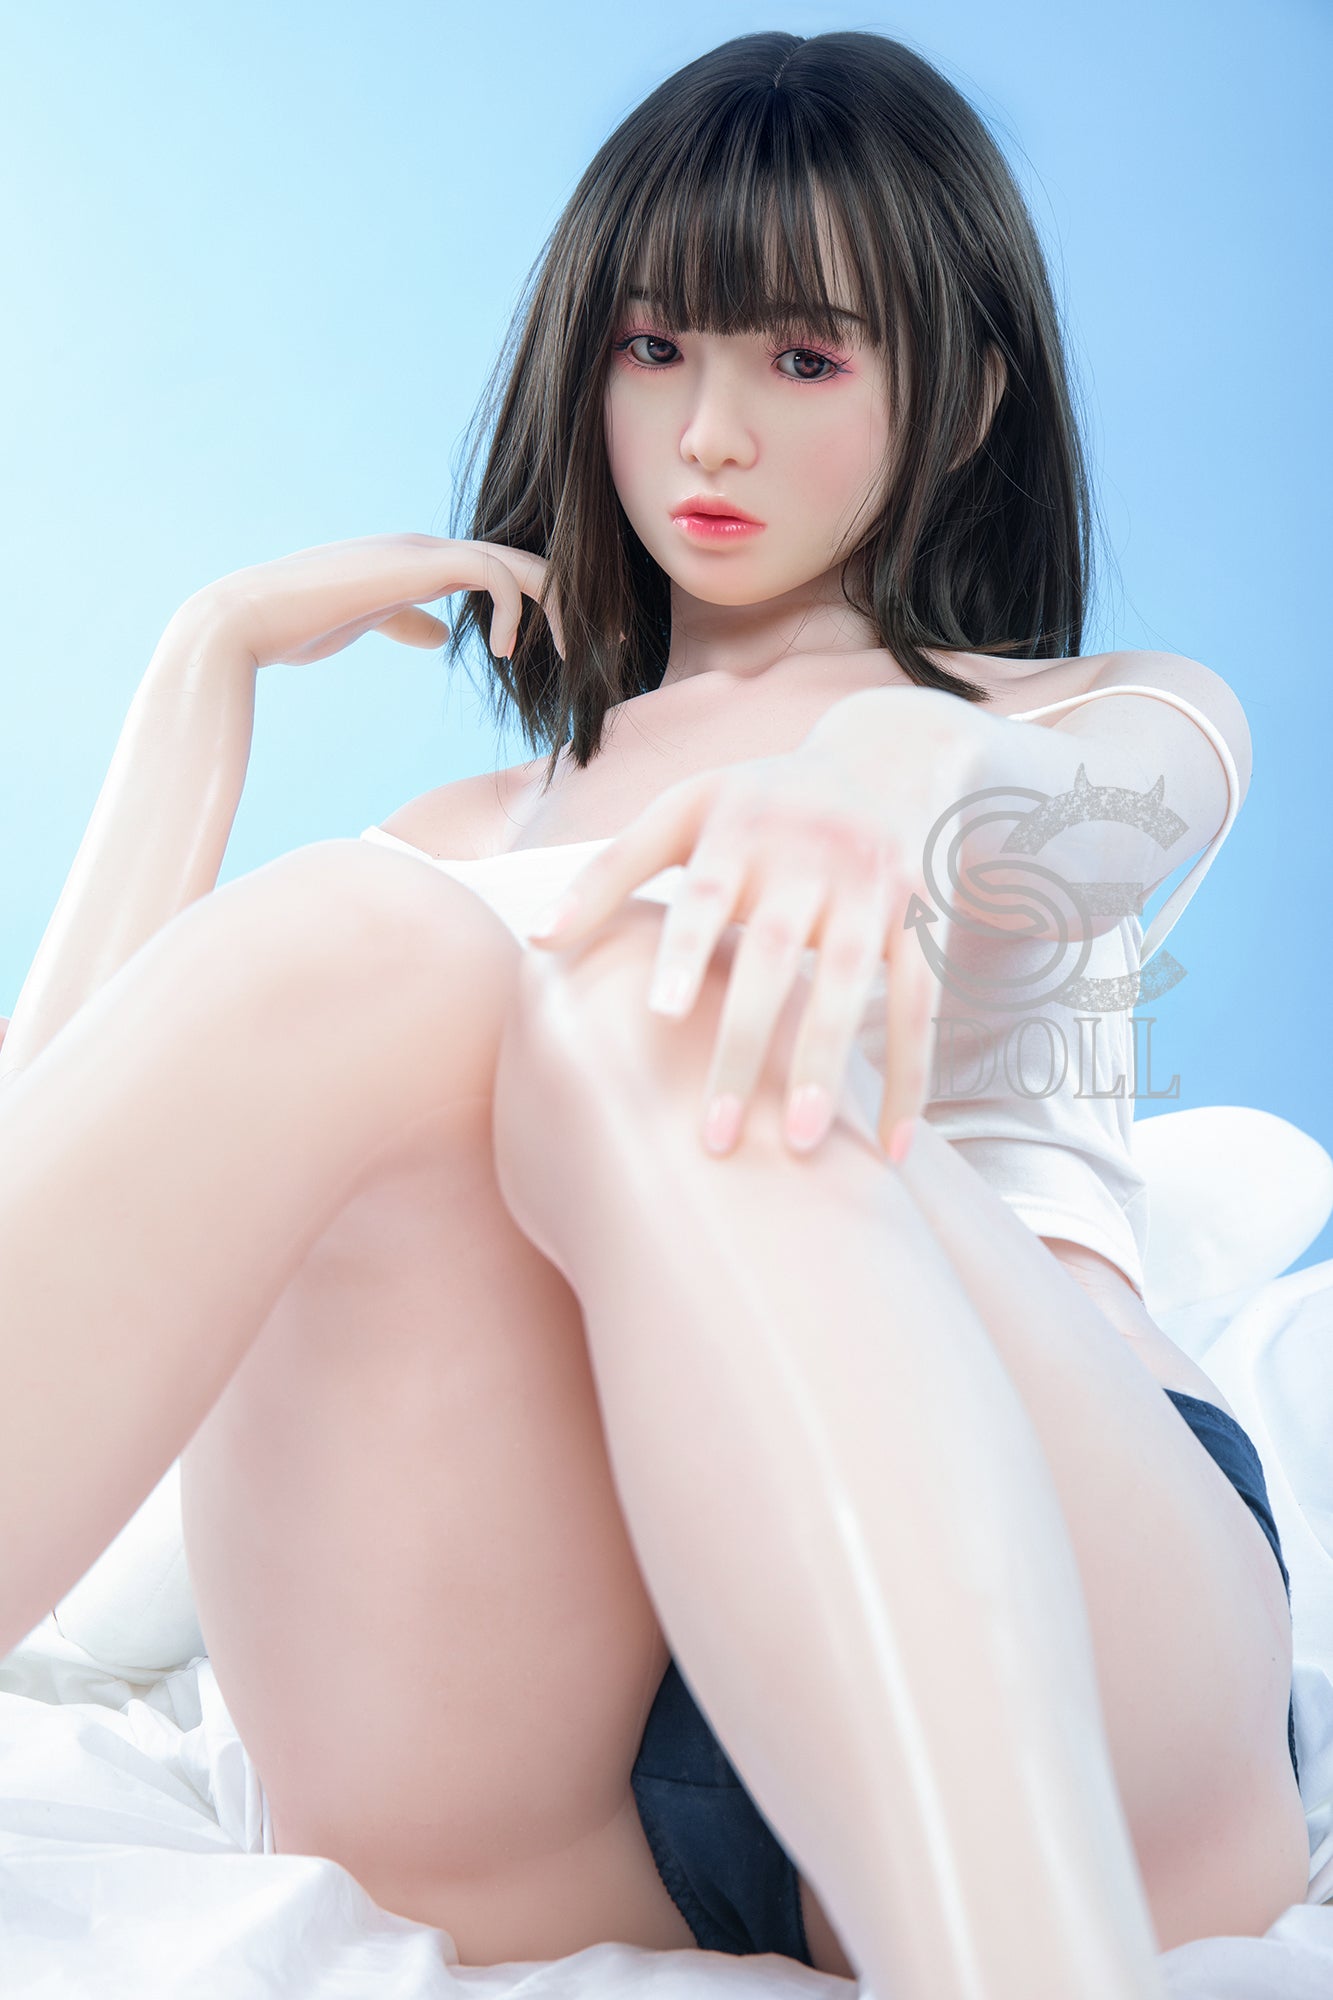 SEDOLL 160 cm C Silicone - Pearl | Buy Sex Dolls at DOLLS ACTUALLY